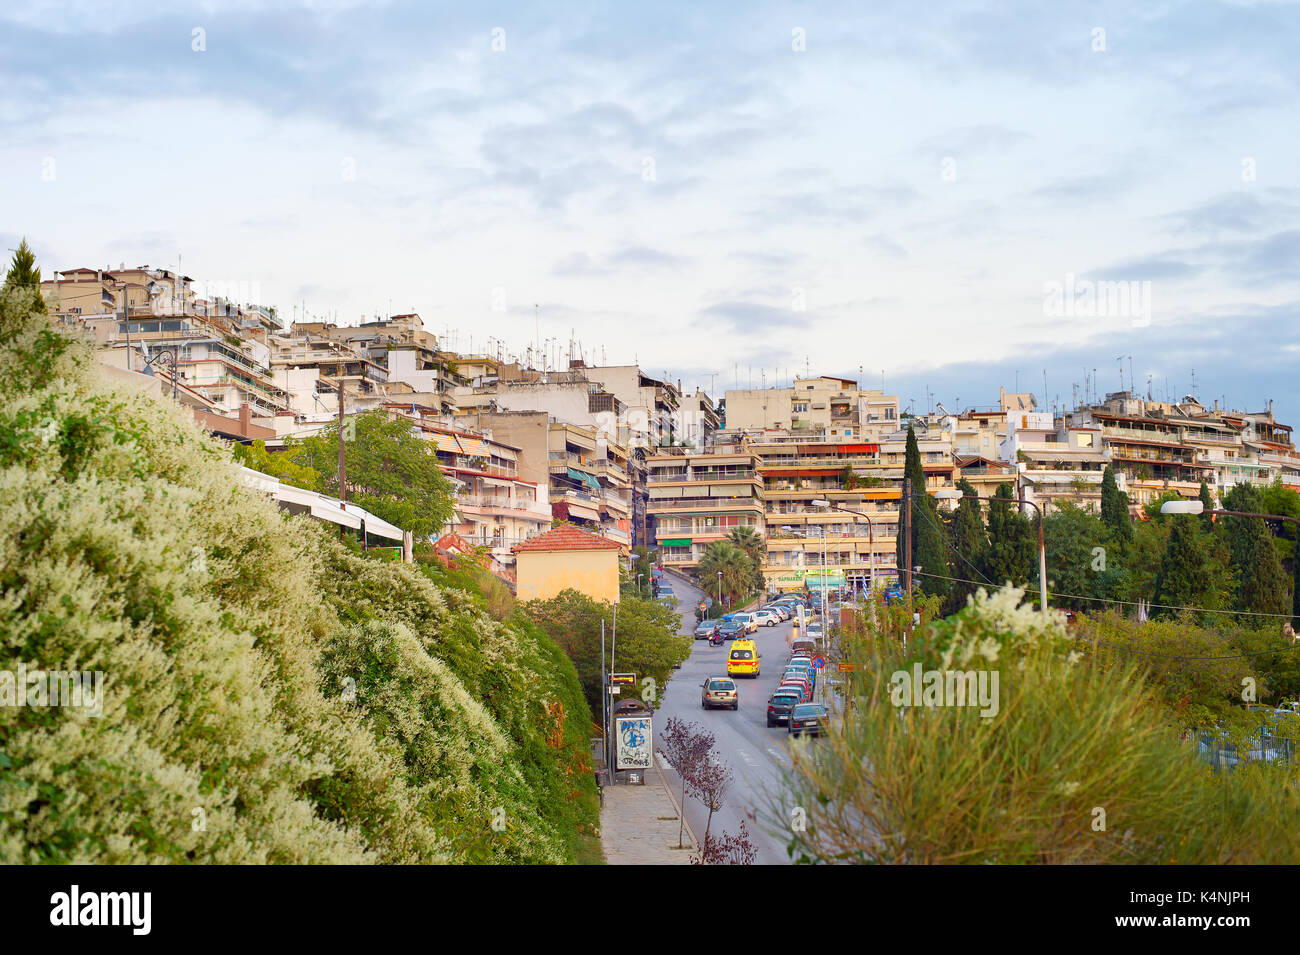 THESSALONIKI, GREECE - OCT 18, 2016: View of architecture of Thesaaloniki up the hill district. Thessaloniki is the second biggest city of Greece Stock Photo